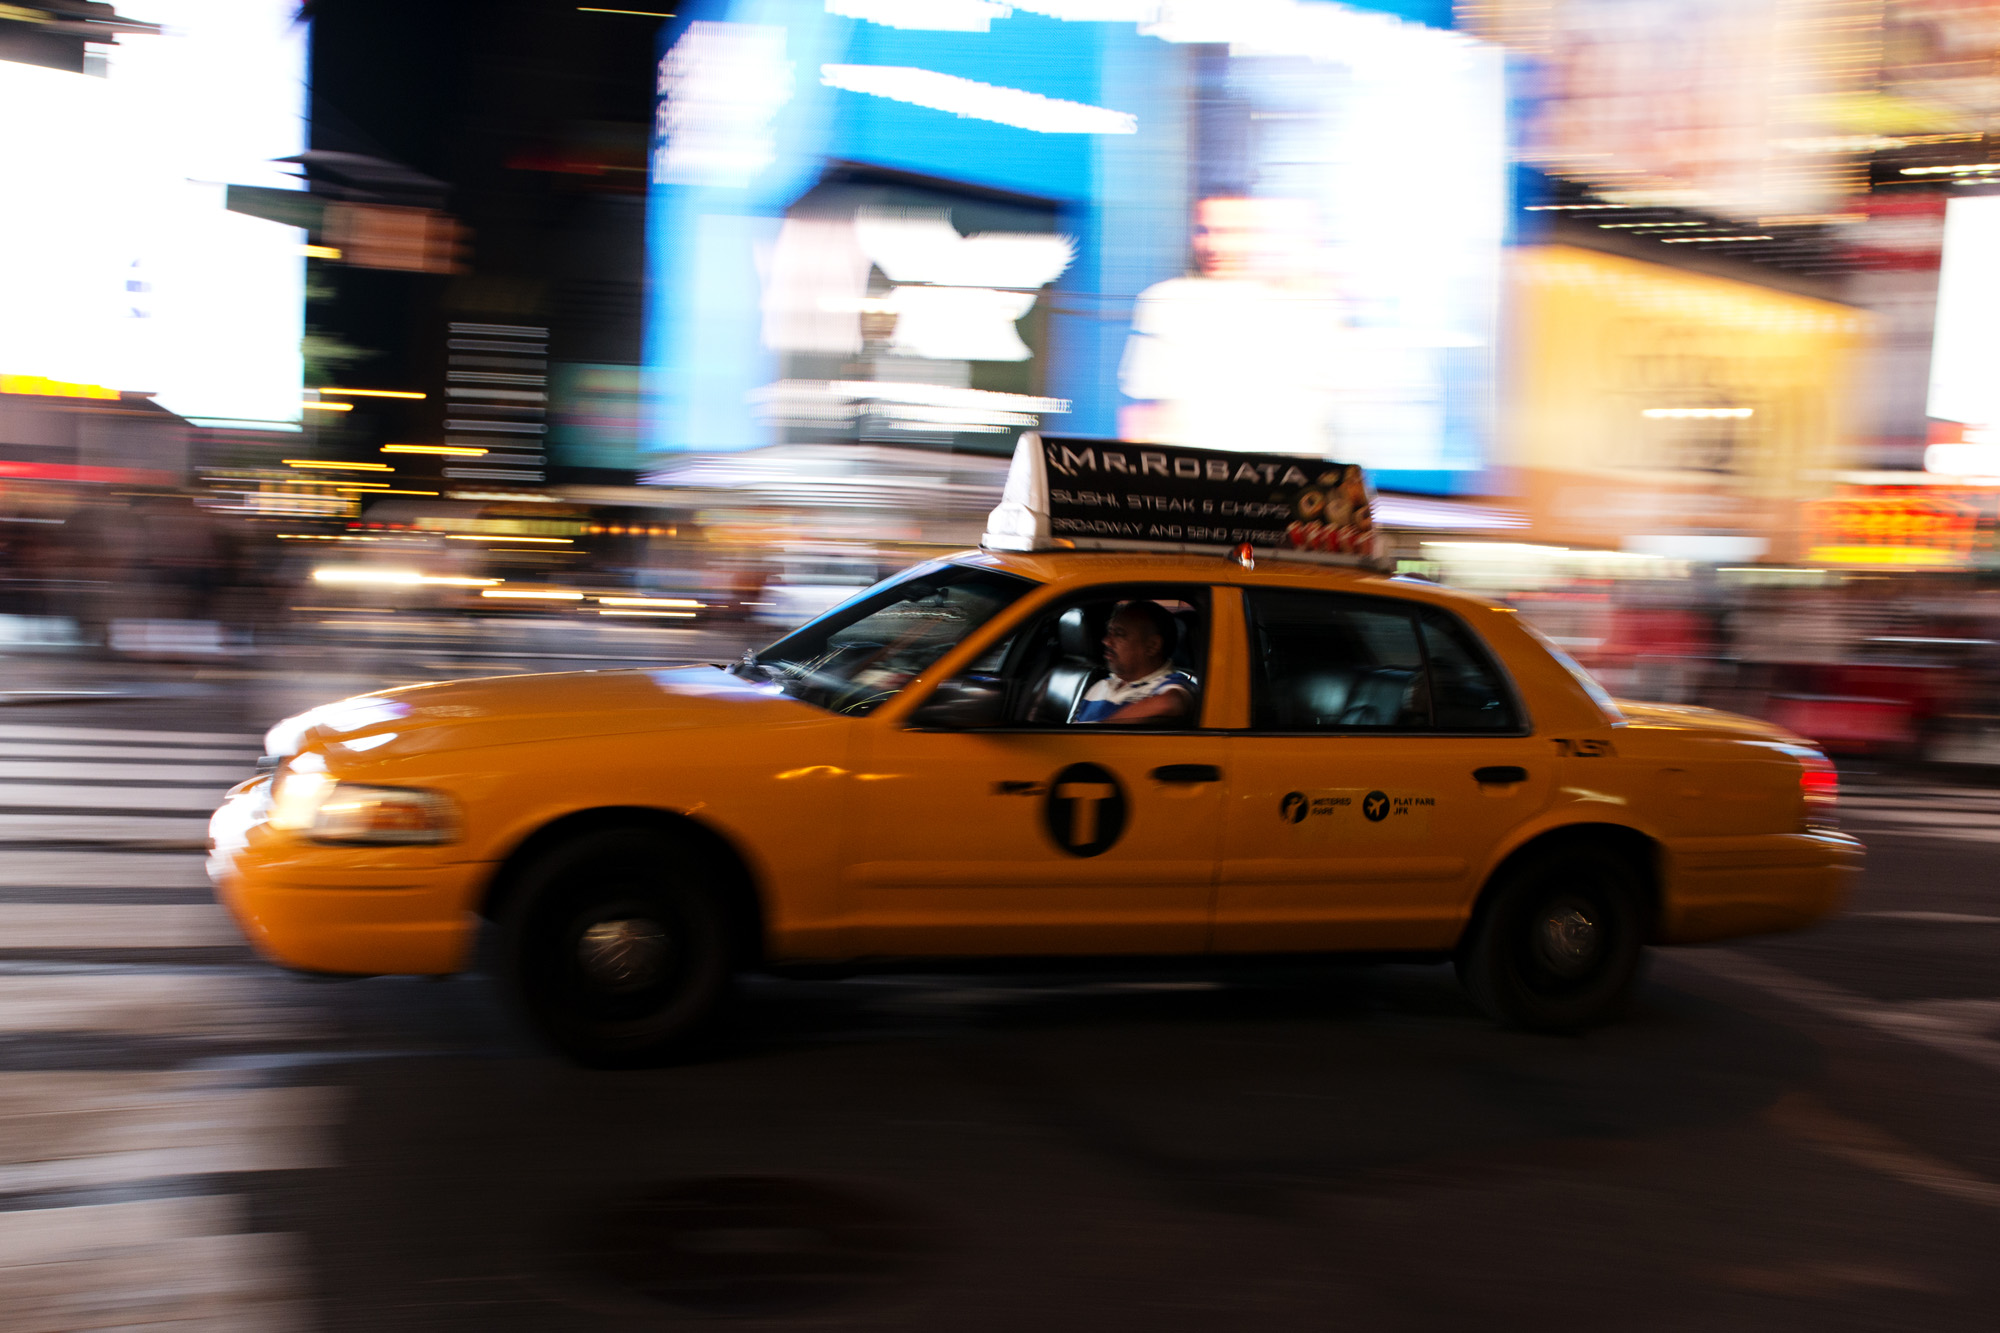 a taxi cab with a black top on a city street